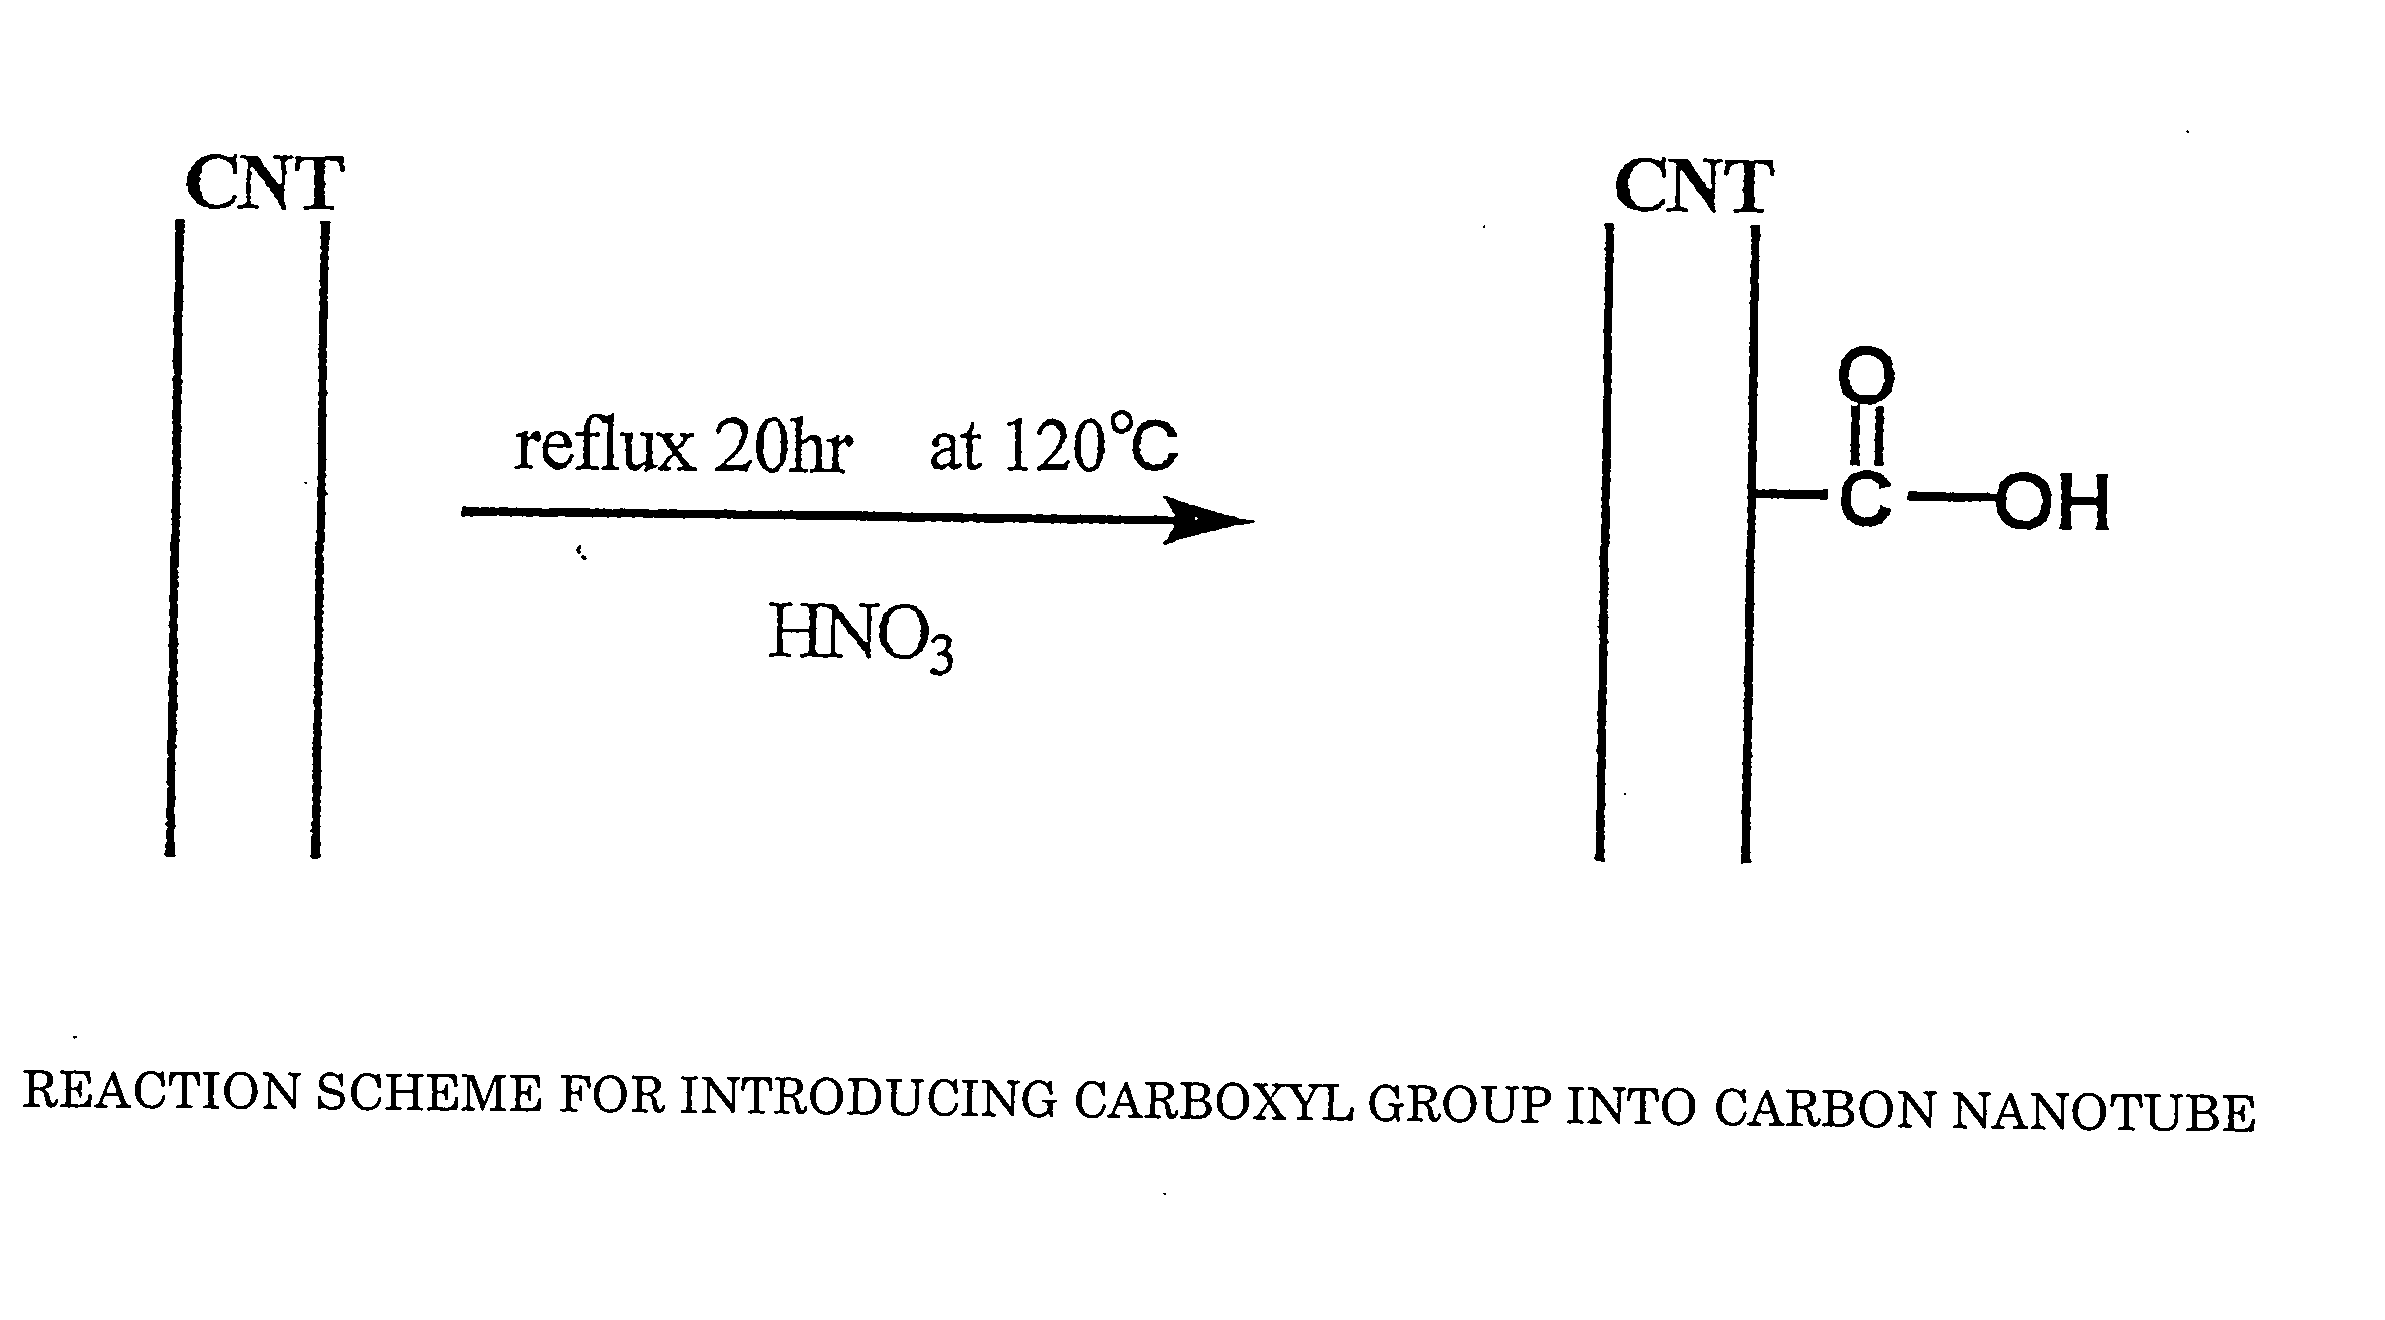 Composite and method of manufacturing the same